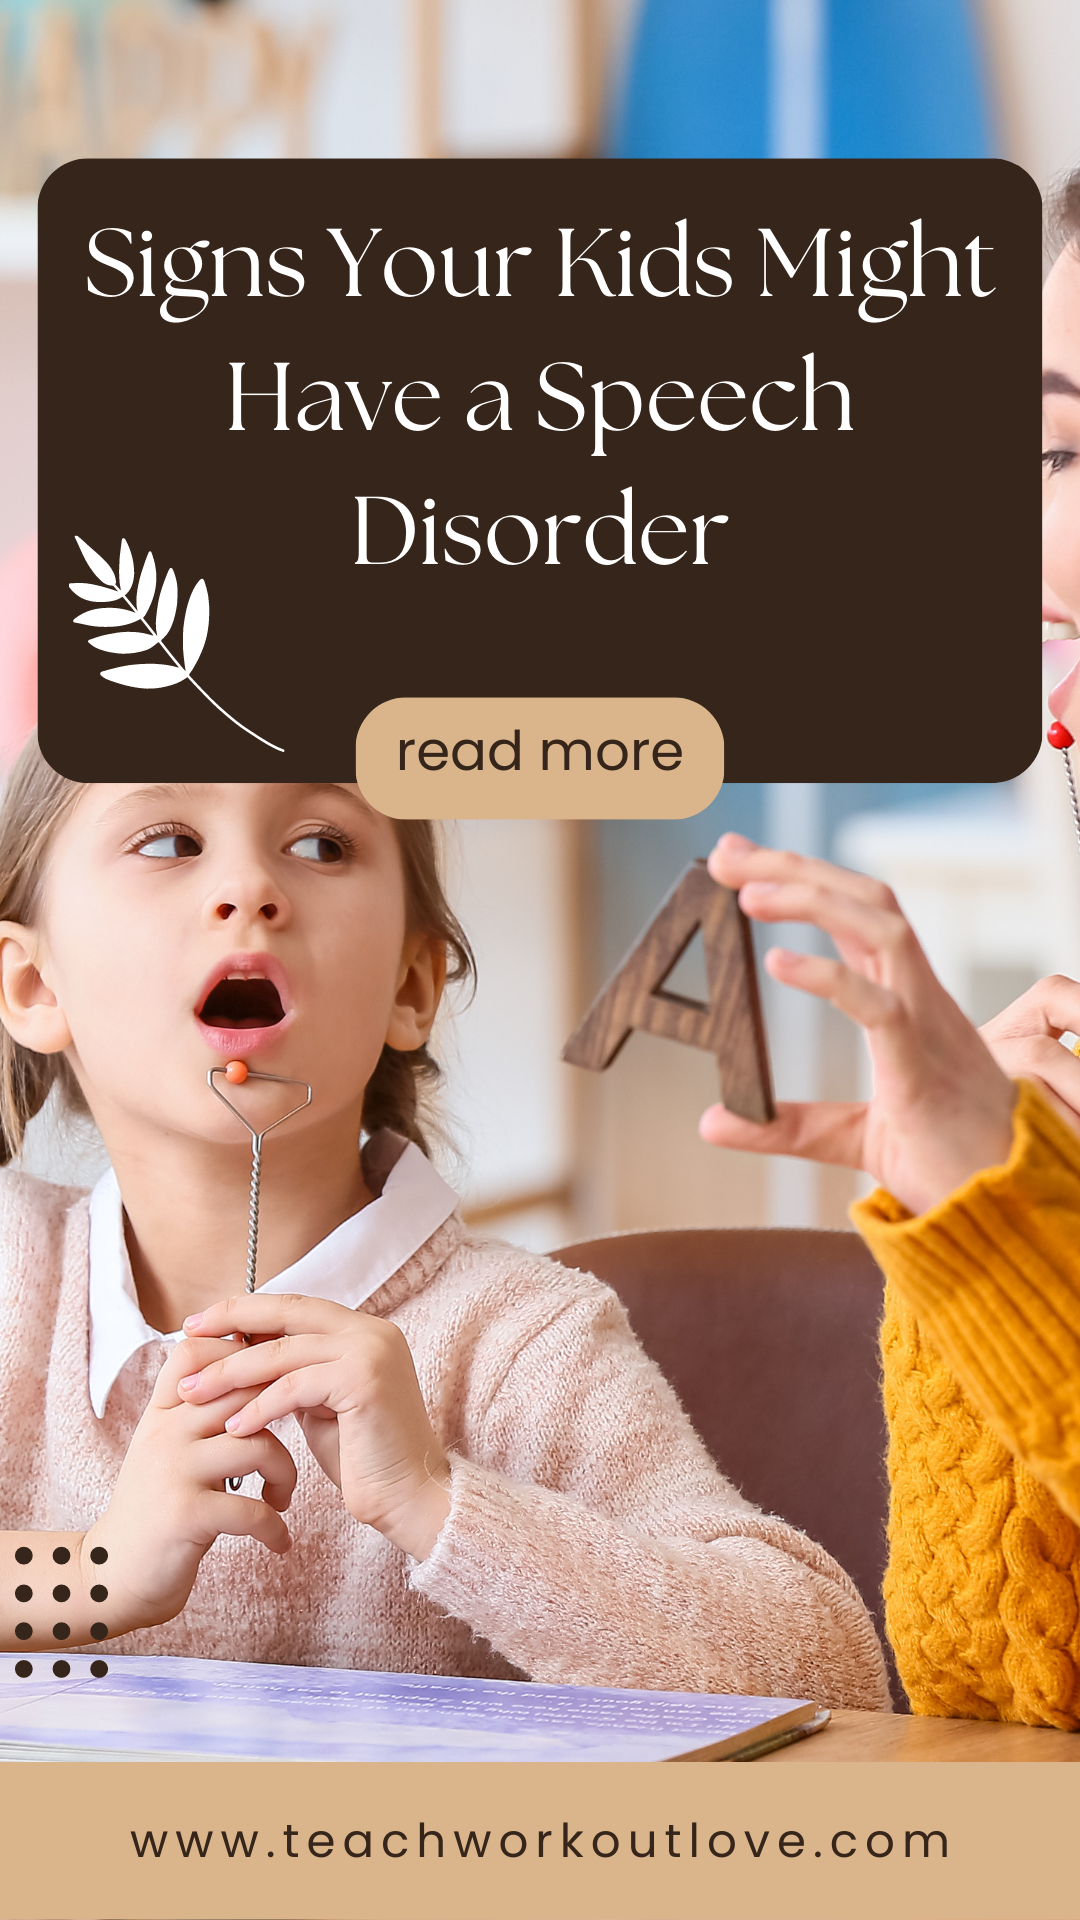 In this article, we take a look at common early signs that indicate your child may have a speech disorder. We also go over some ways you can help them work through it at home.